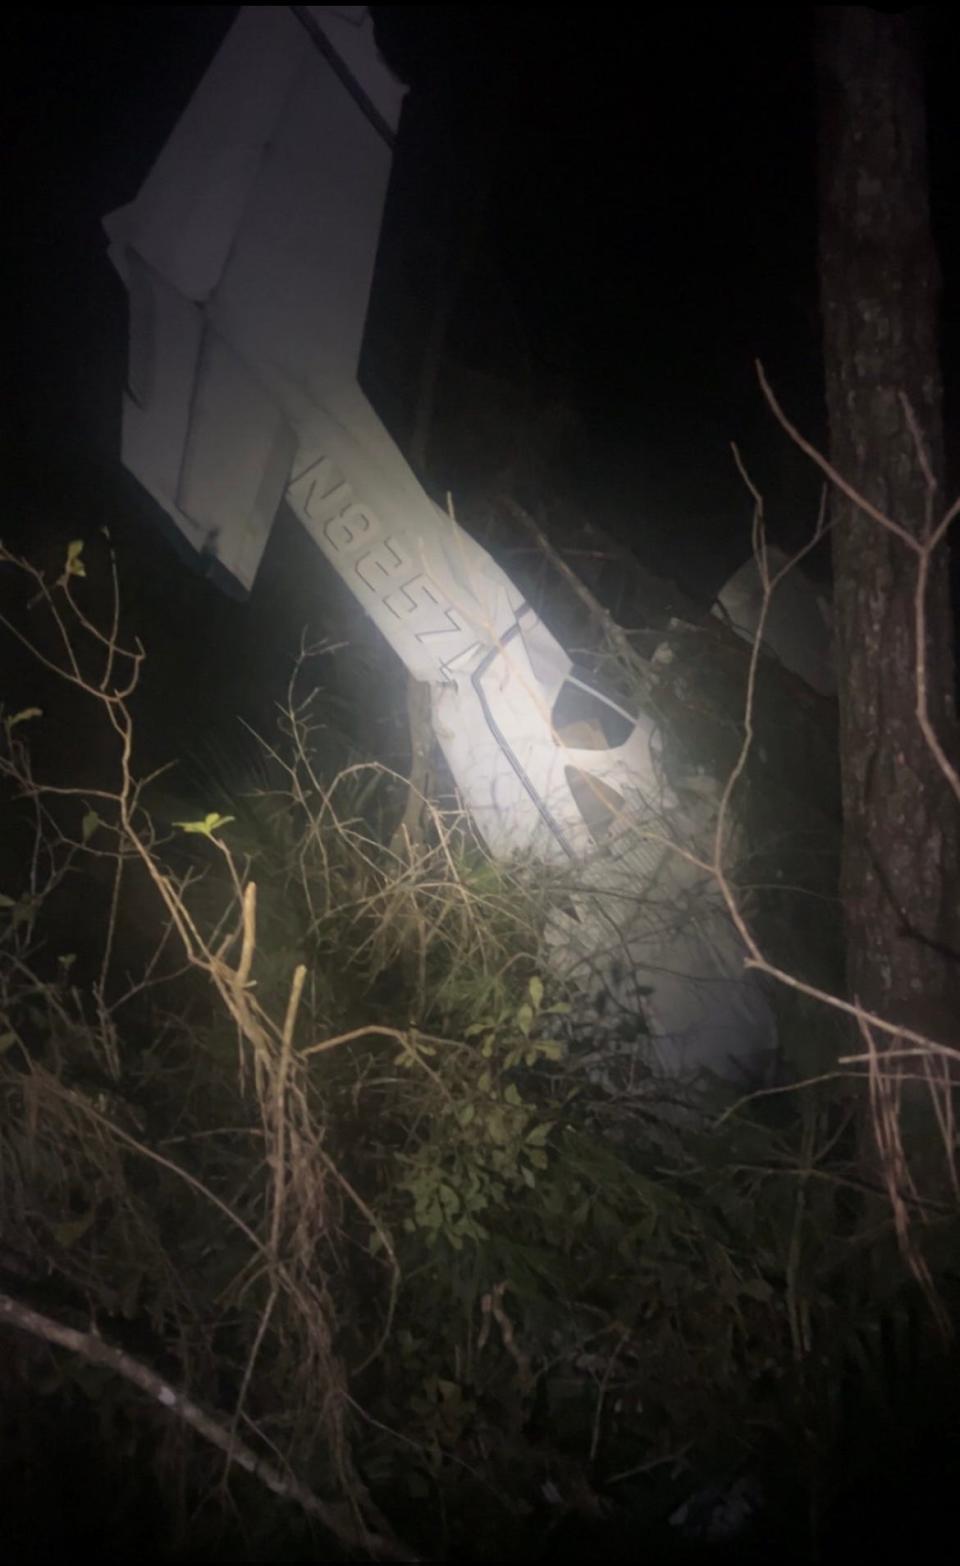 A Cessna 172 crashed in some woods about 1:49 a.m. Friday in the Lake George State Forest northwest of DeLand. The pilot reported only minor injuries, the Sheriff's Office stated The plane was flying from Slidell, Louisiana to DeLand. The pilot was the only occupant.